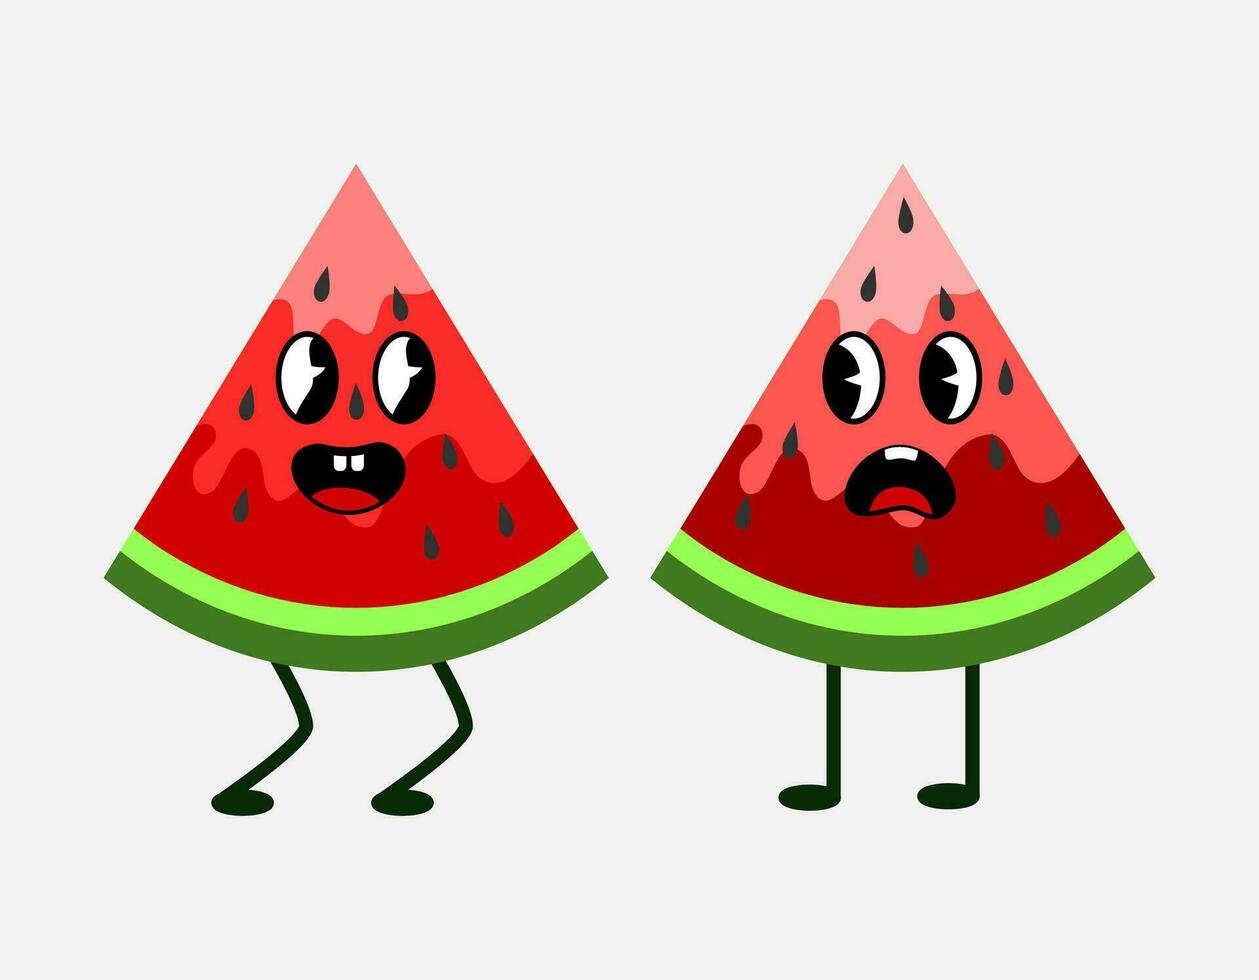 Cute watermelon slices in green, red, pink. Cute fruit character with happy face. Watermelon couple mascot with legs. Flat vector illustration